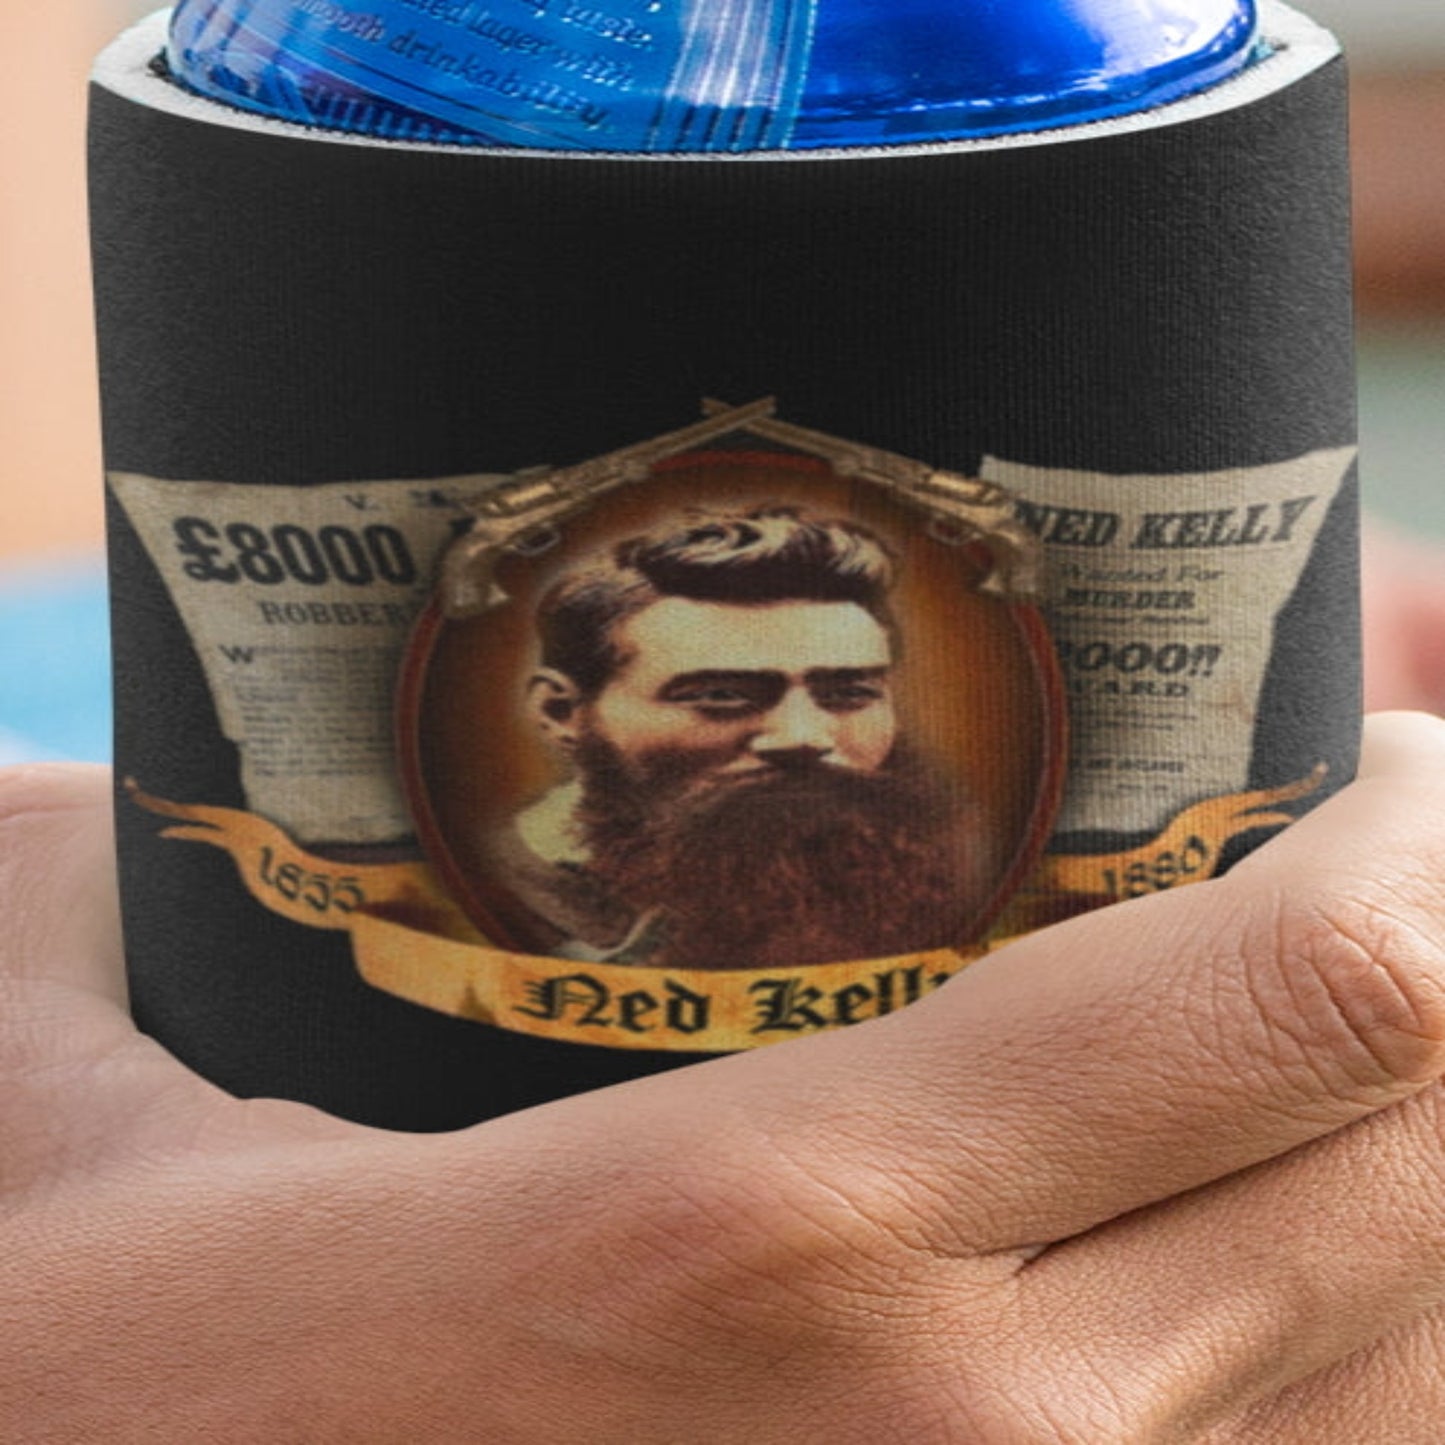 Ned Kelly 5 pack Stubby Coolers